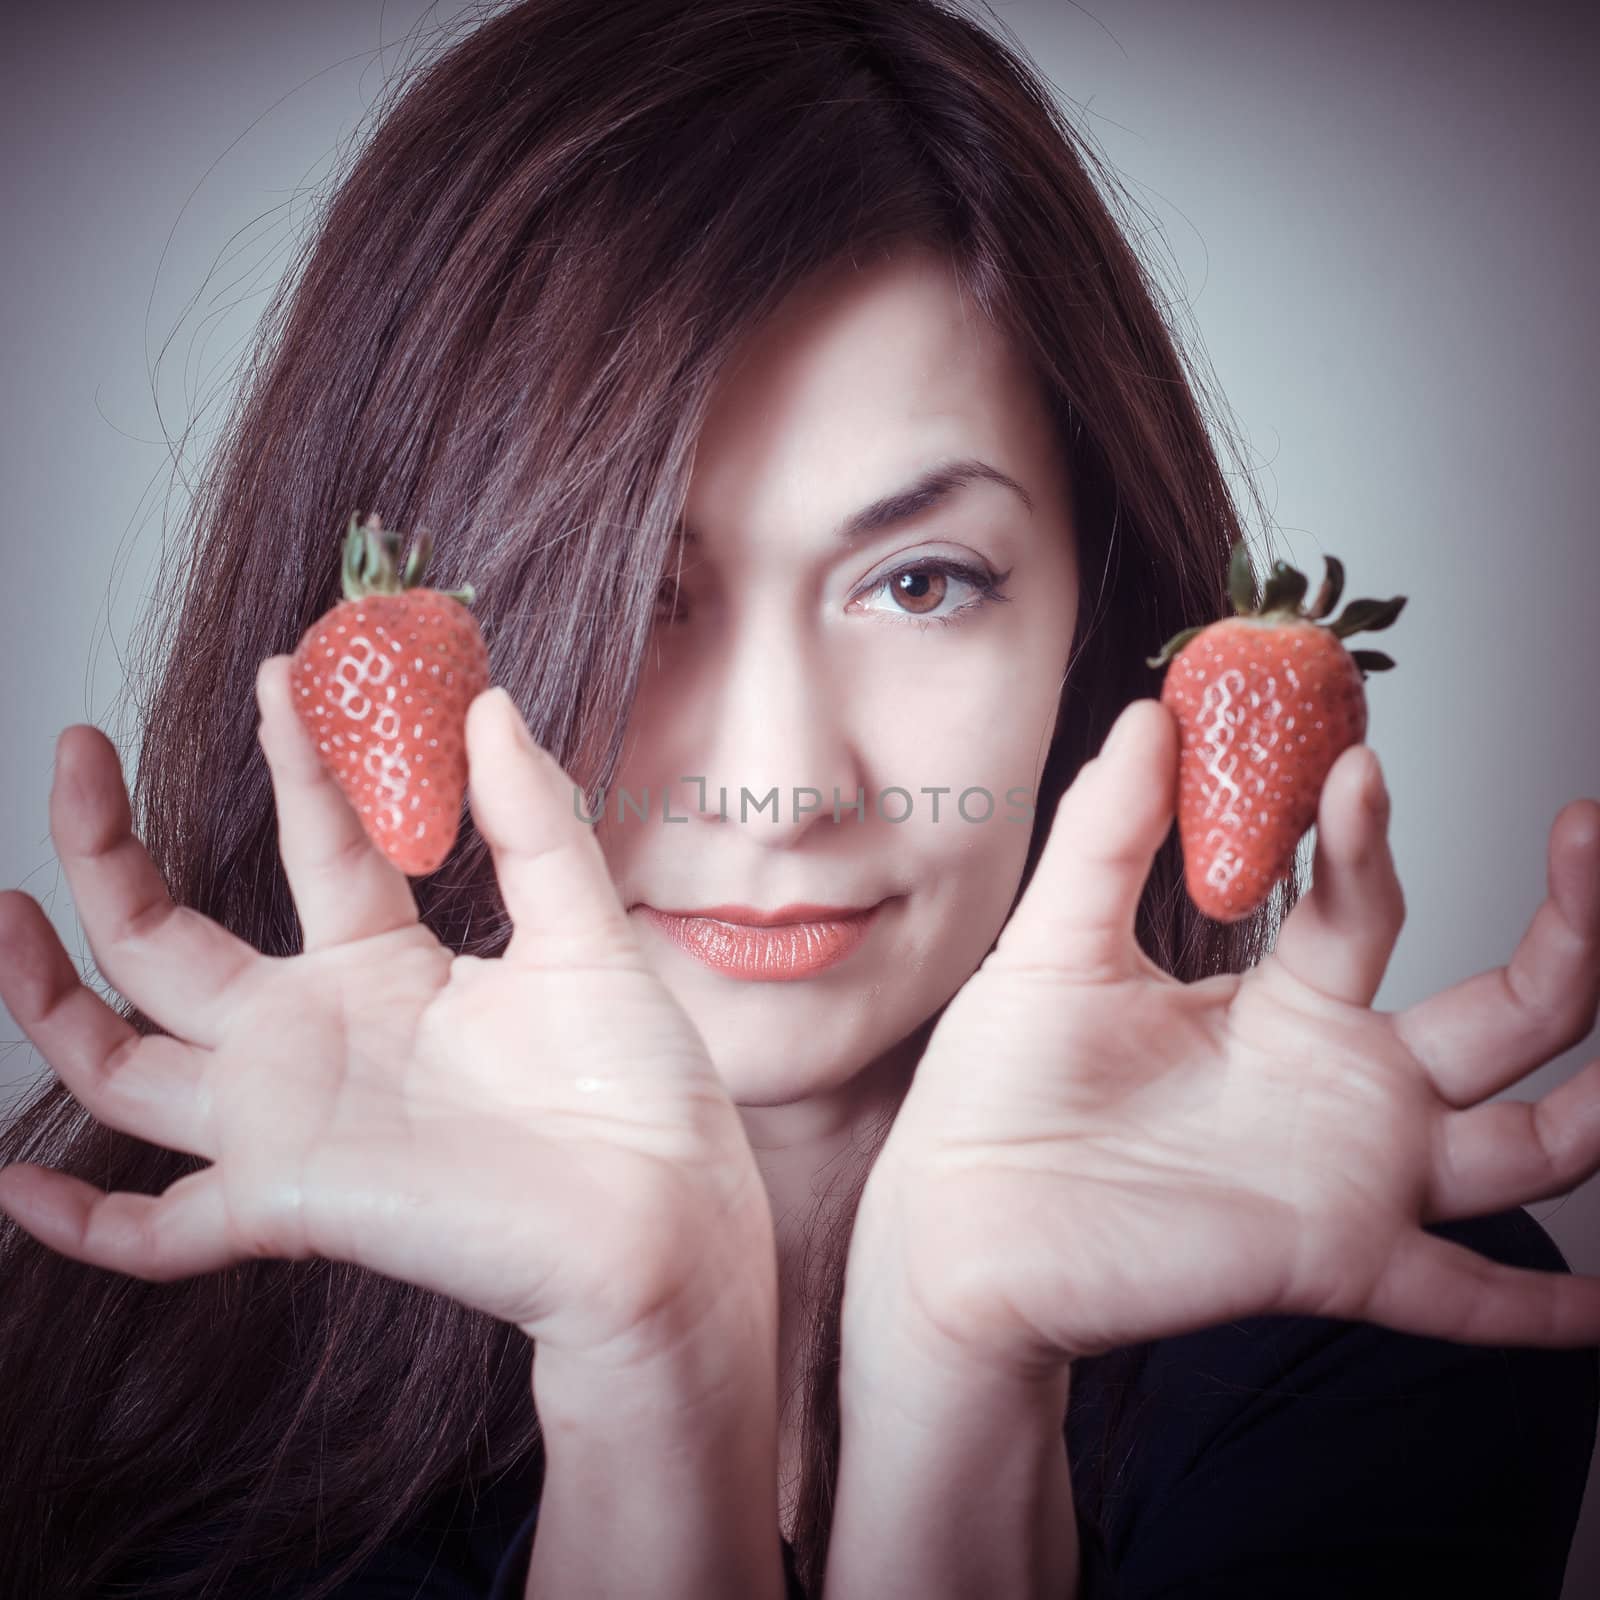 beautiful woman with strawberries on gray background